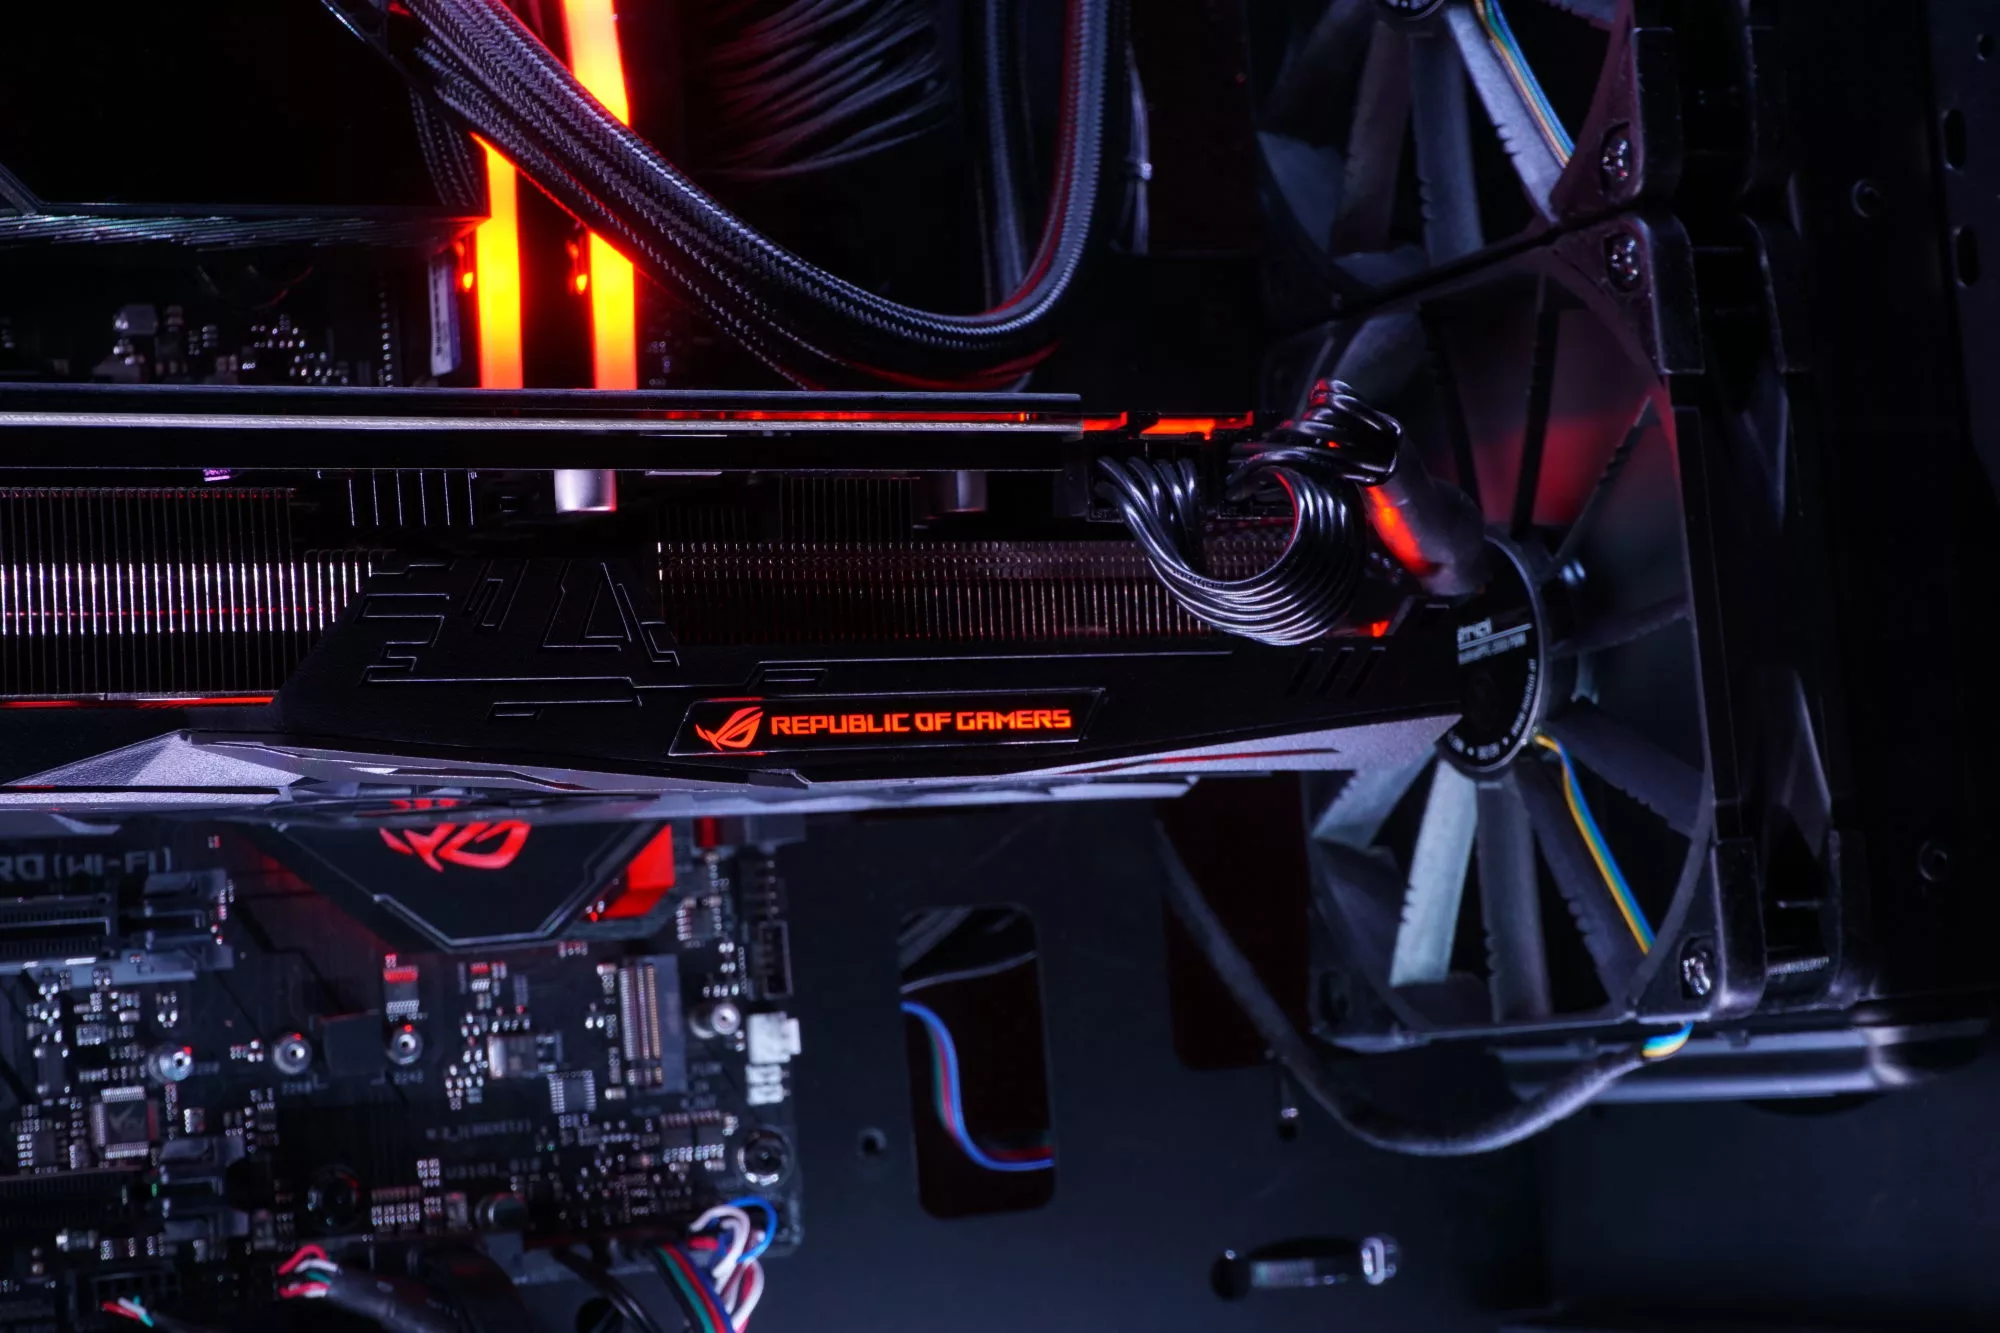 Balance your PC's cooling with FanConnect II and Fan Xpert 4 | ROG -  Republic of Gamers Global